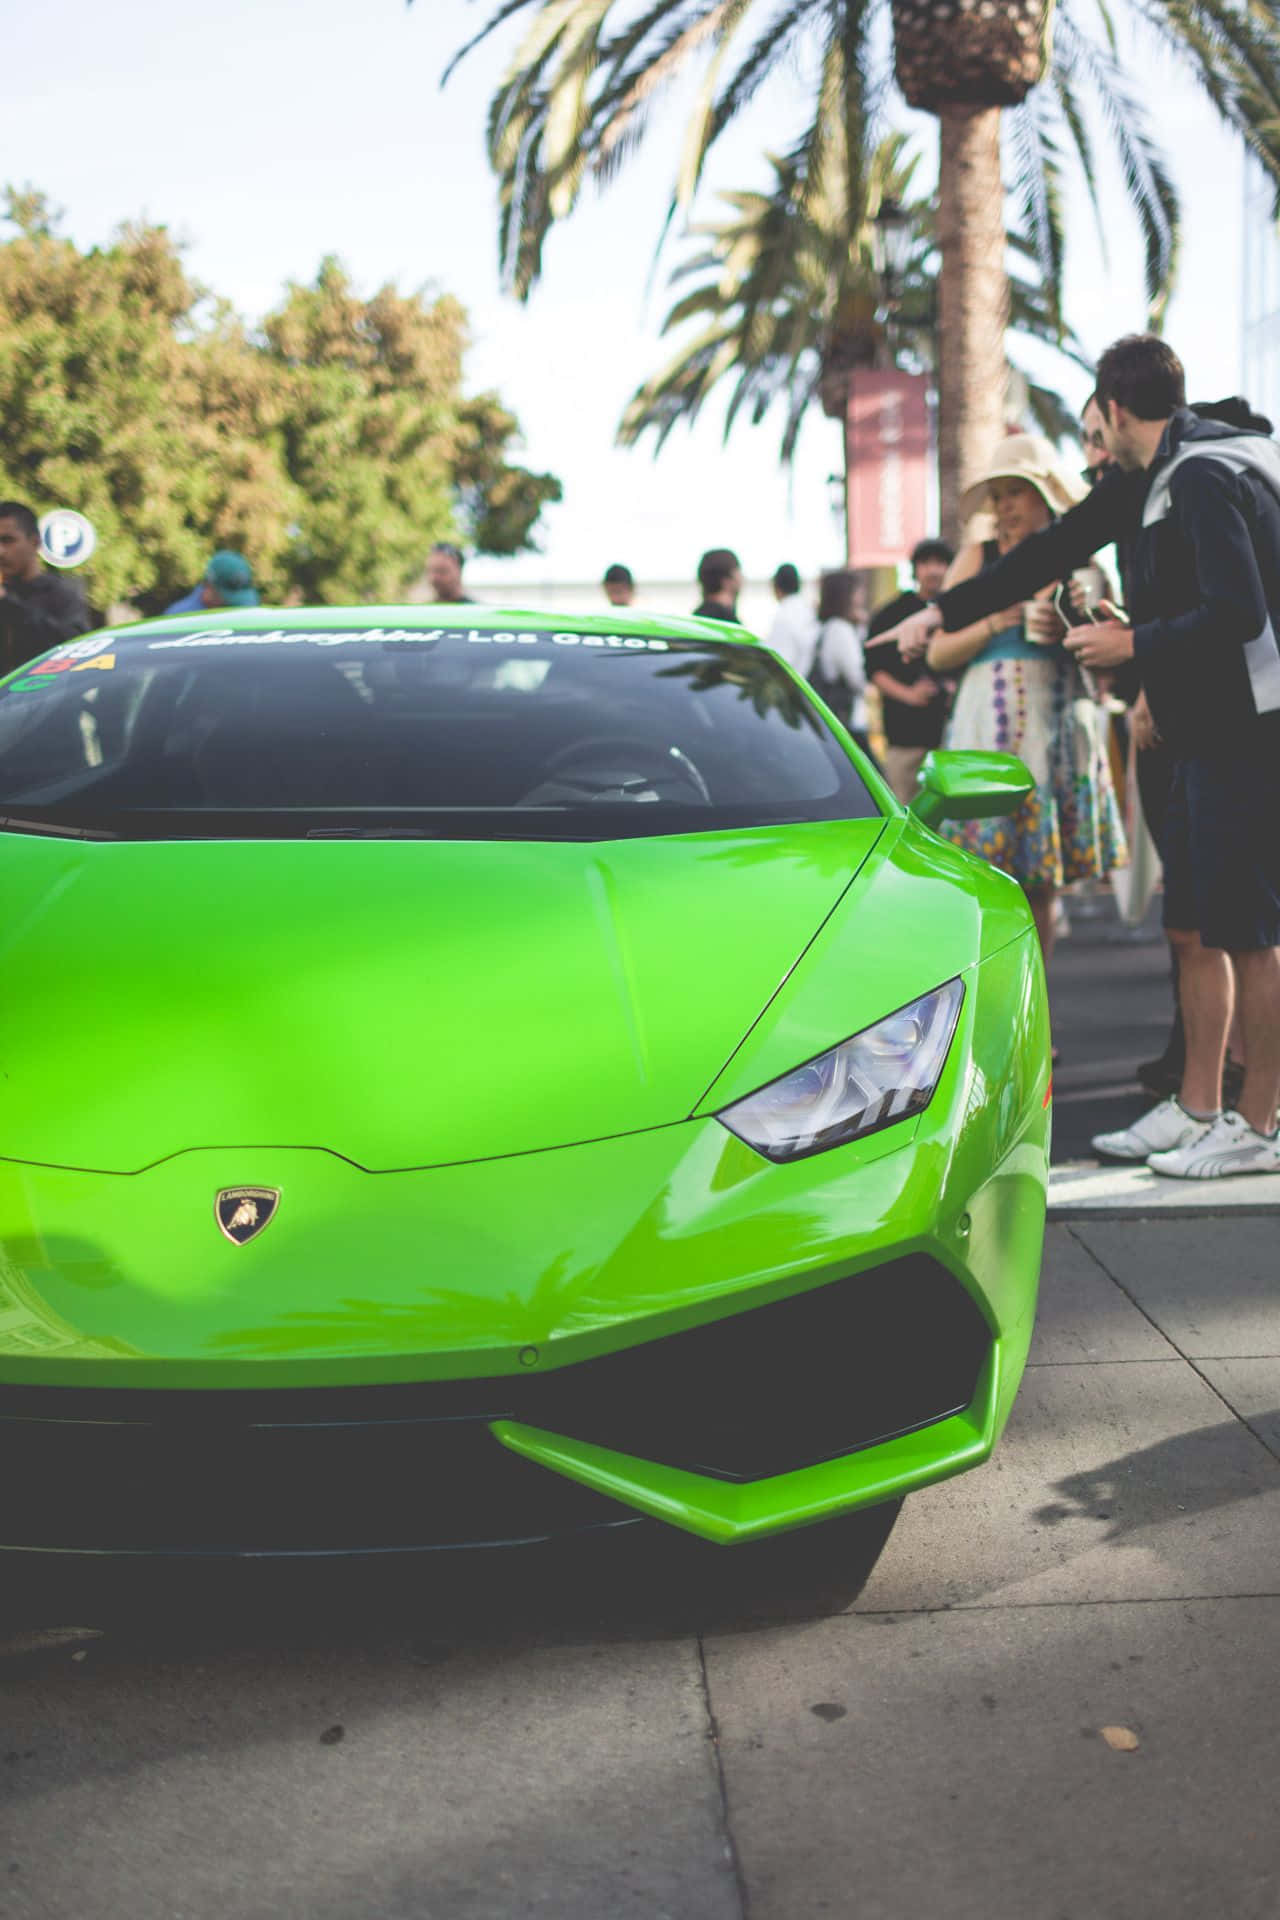 An exquisite green Lamborghini crafted for iPhone Wallpaper